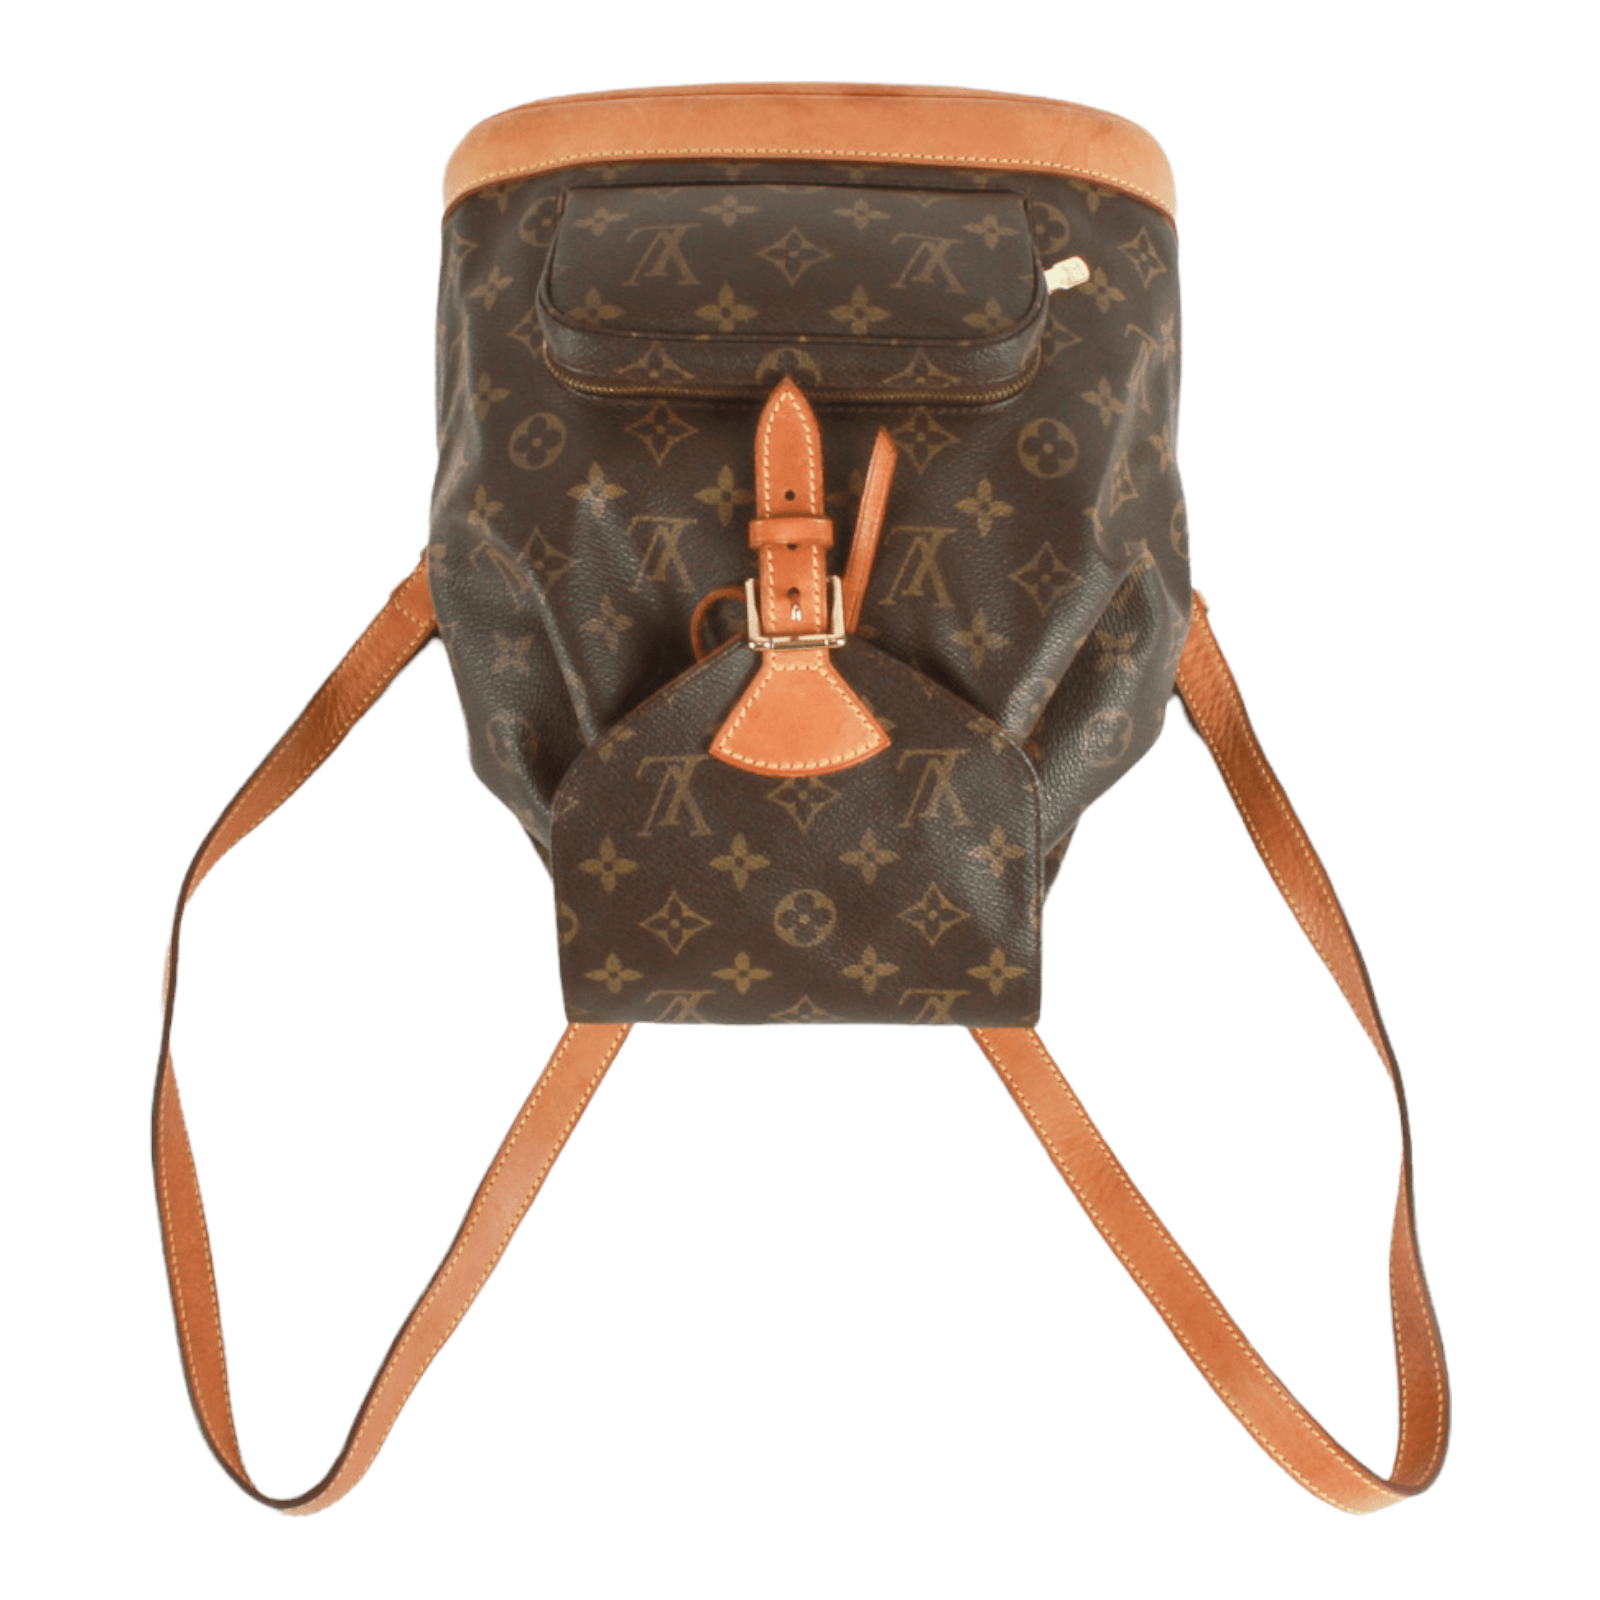 Buy [Used] LOUIS VUITTON Backpack Rucksack Montsuri GM Monogram M51135 from  Japan - Buy authentic Plus exclusive items from Japan